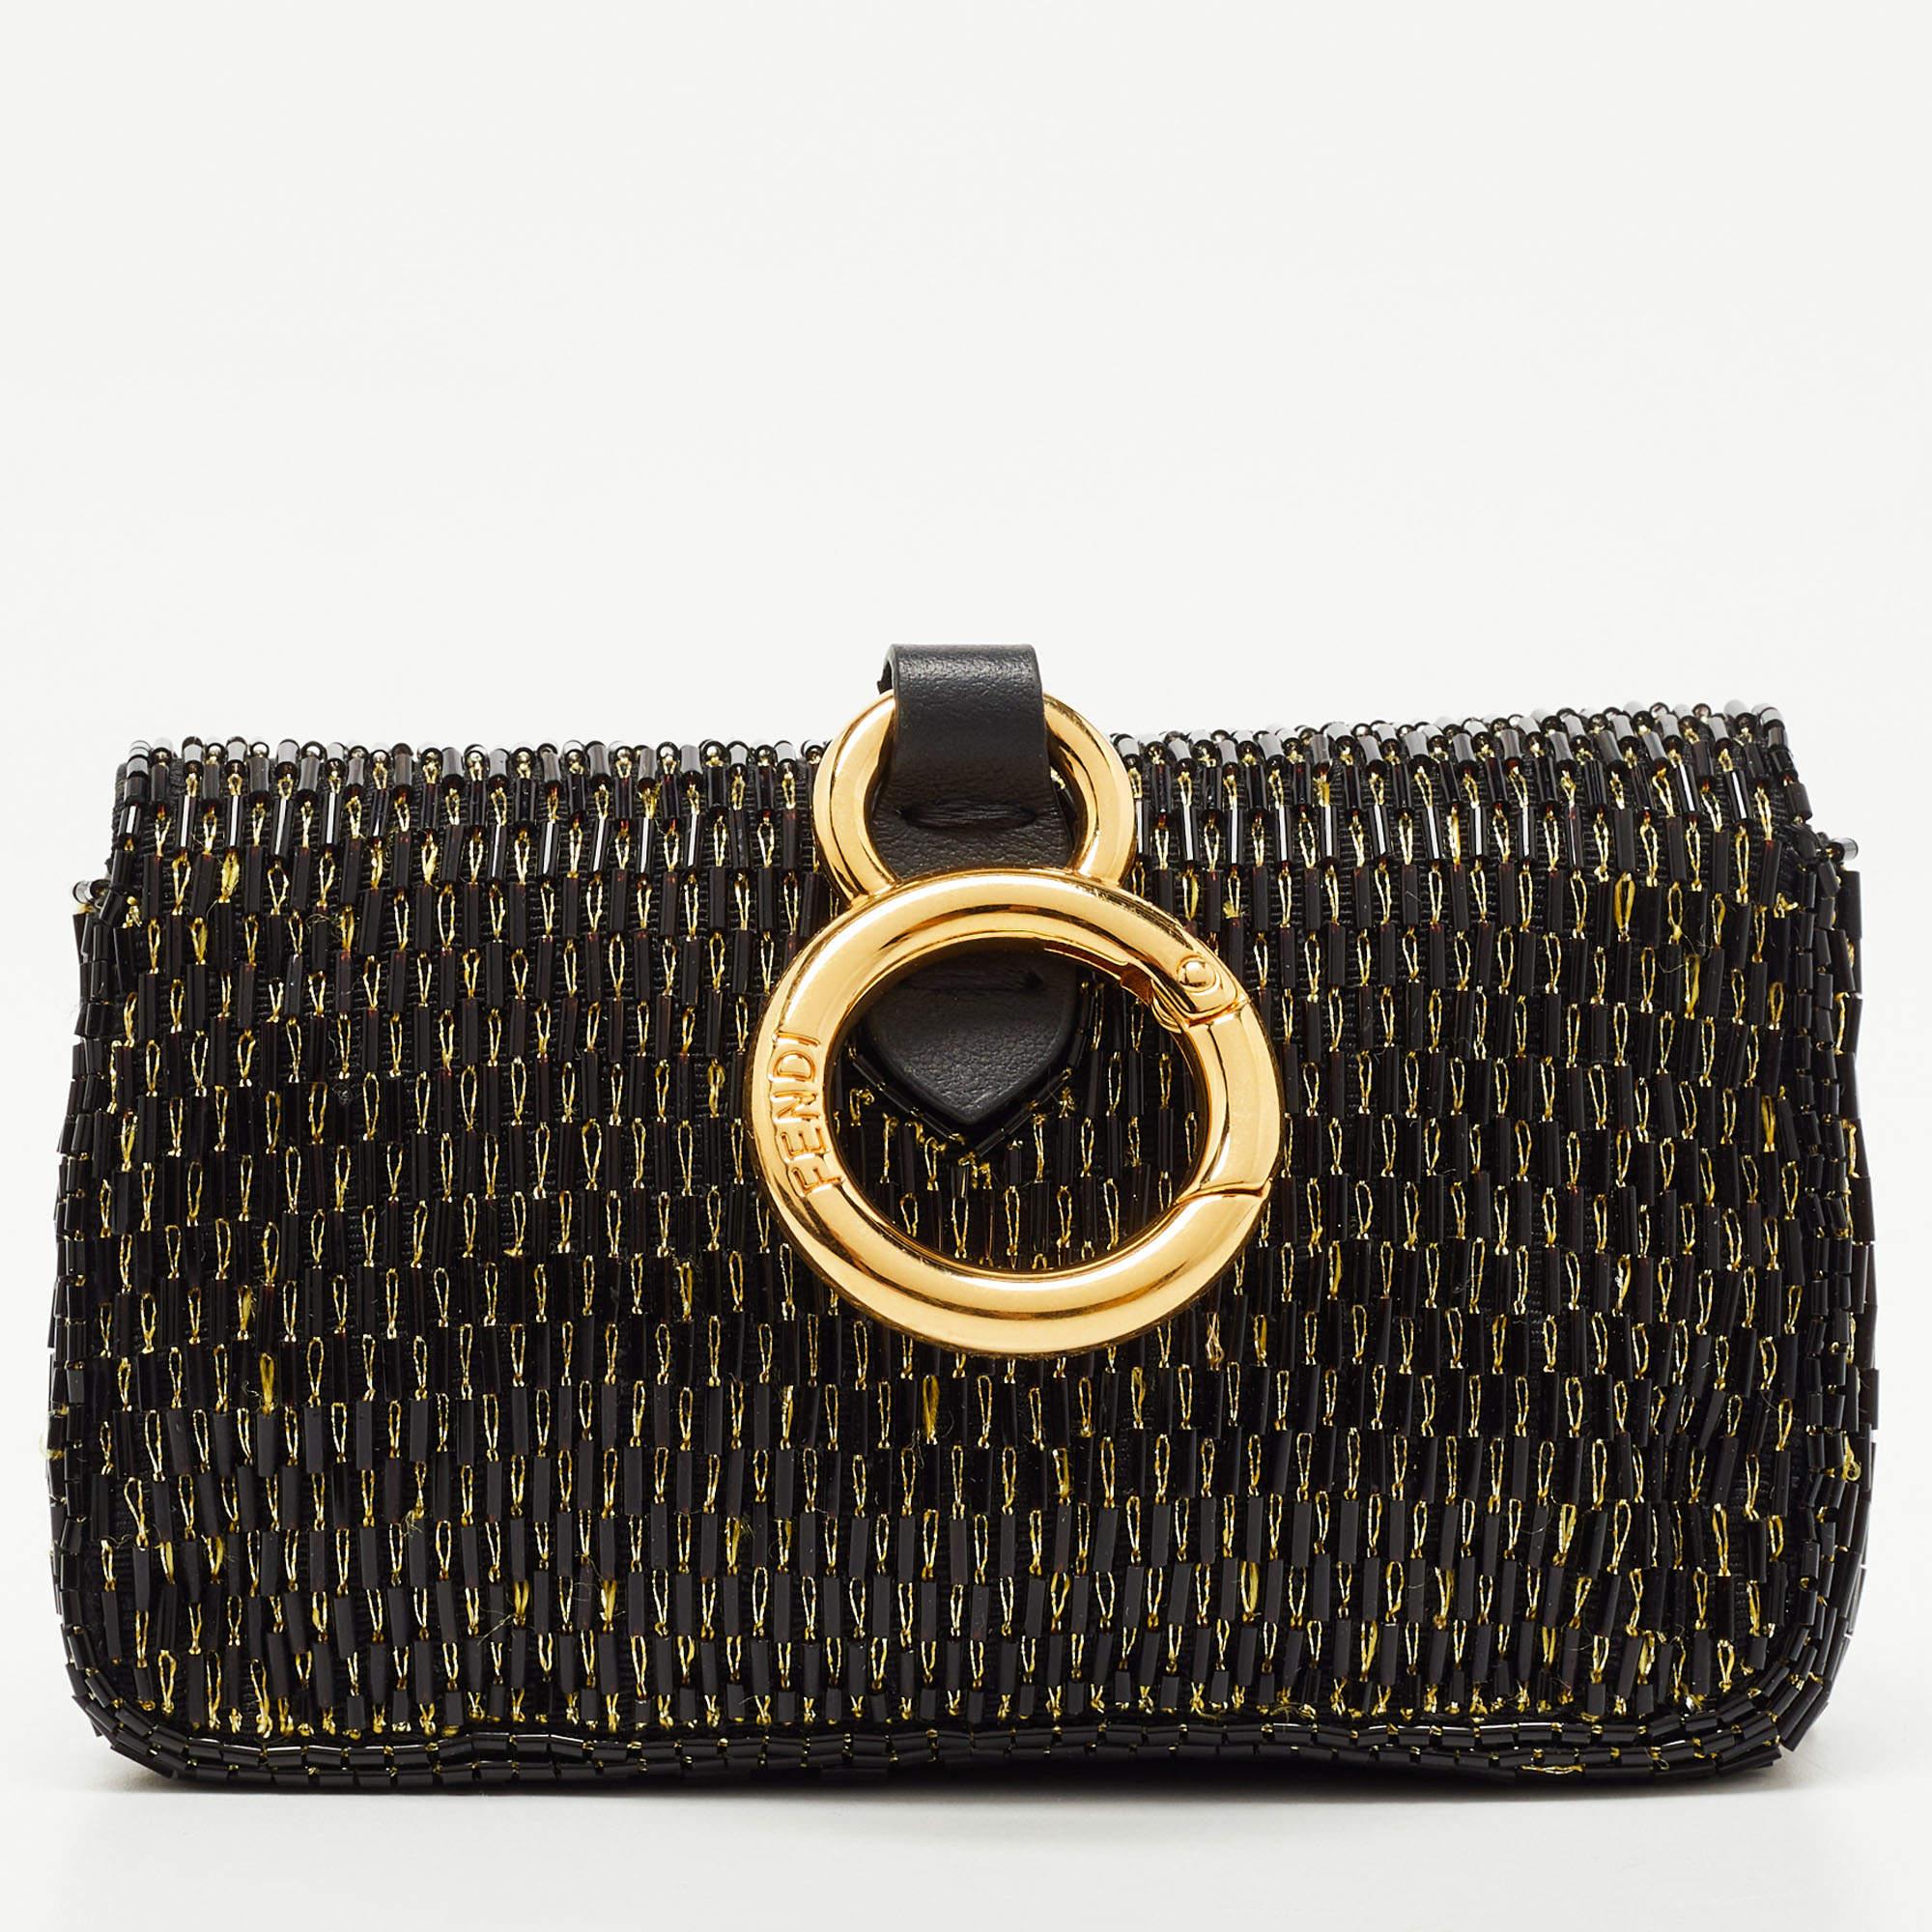 First introduced by Venturini Fendi, the Baguette was well-accepted by the fashion elite for its timeless charm and classic allure. This bag can be carried with a chain strap, and it is adorned with gold-tone accents. Created from beads, it features